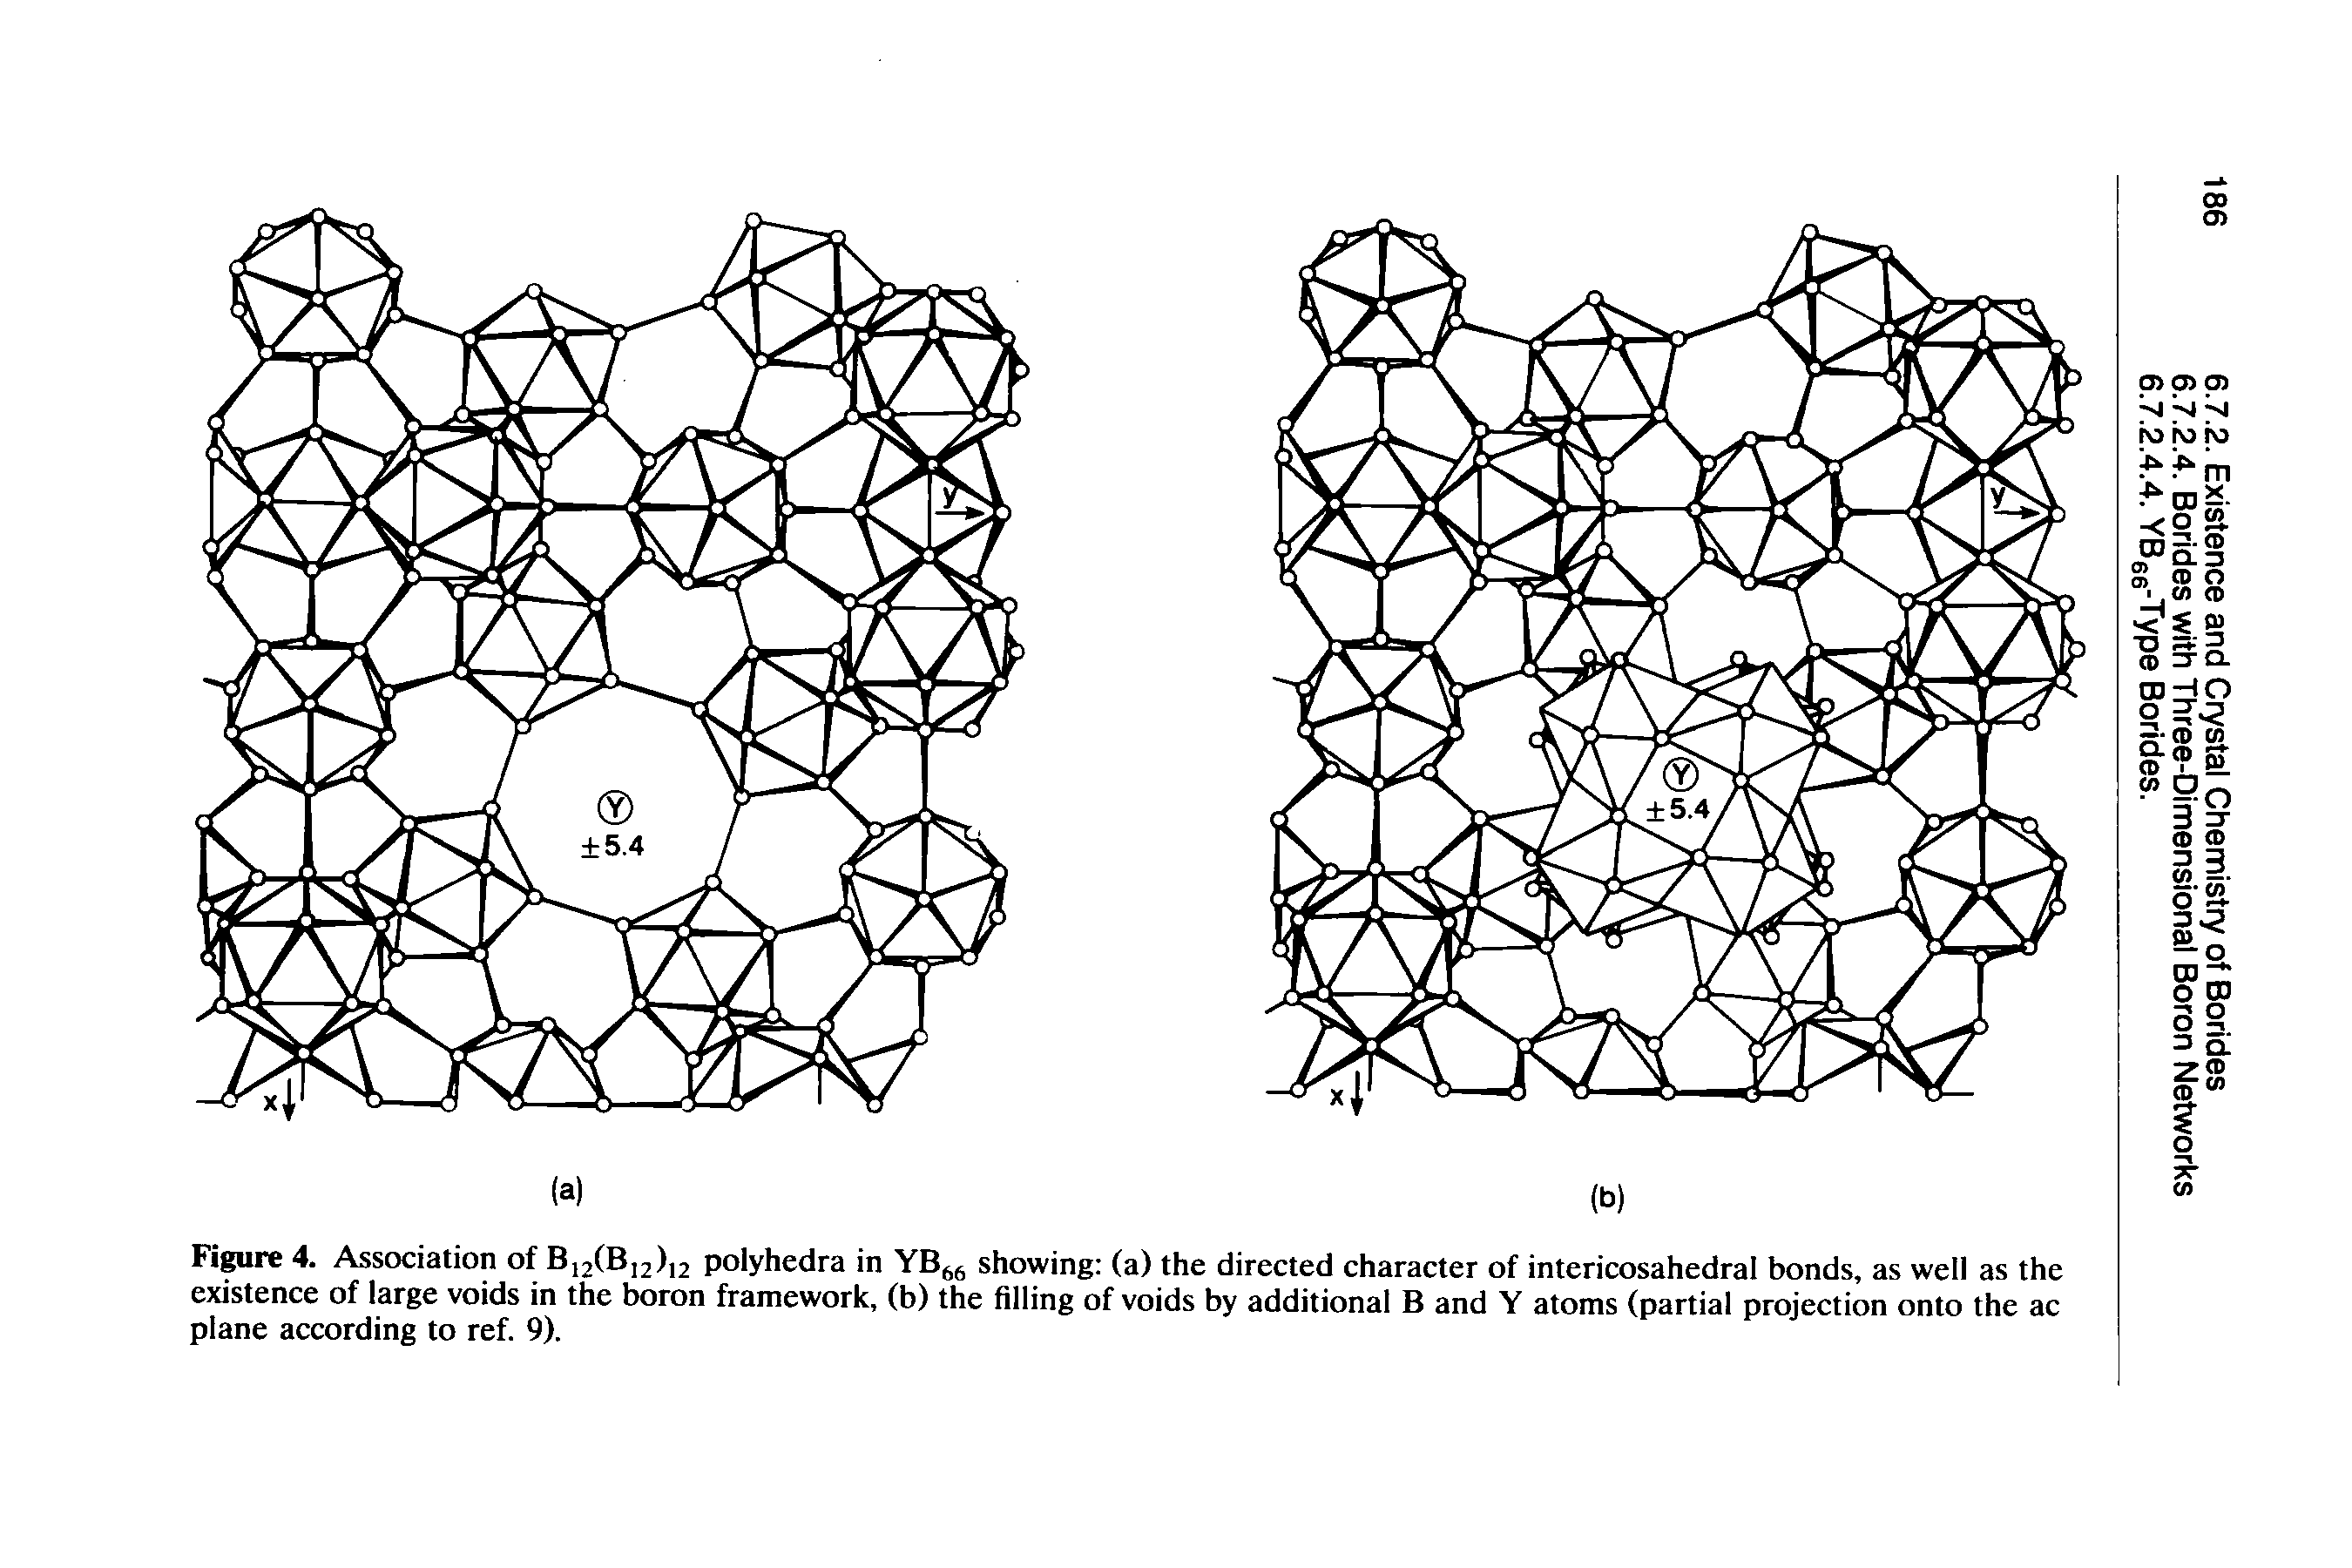 Figure 4. Association of 812(8,2)12 polyhedra in 8 5 showing (a) the directed character of intericosahedral bonds, as well as the existence of large voids in the boron framework, (b) the filling of voids by additional 8 and Y atoms (partial projection onto the ac plane according to ref. 9).